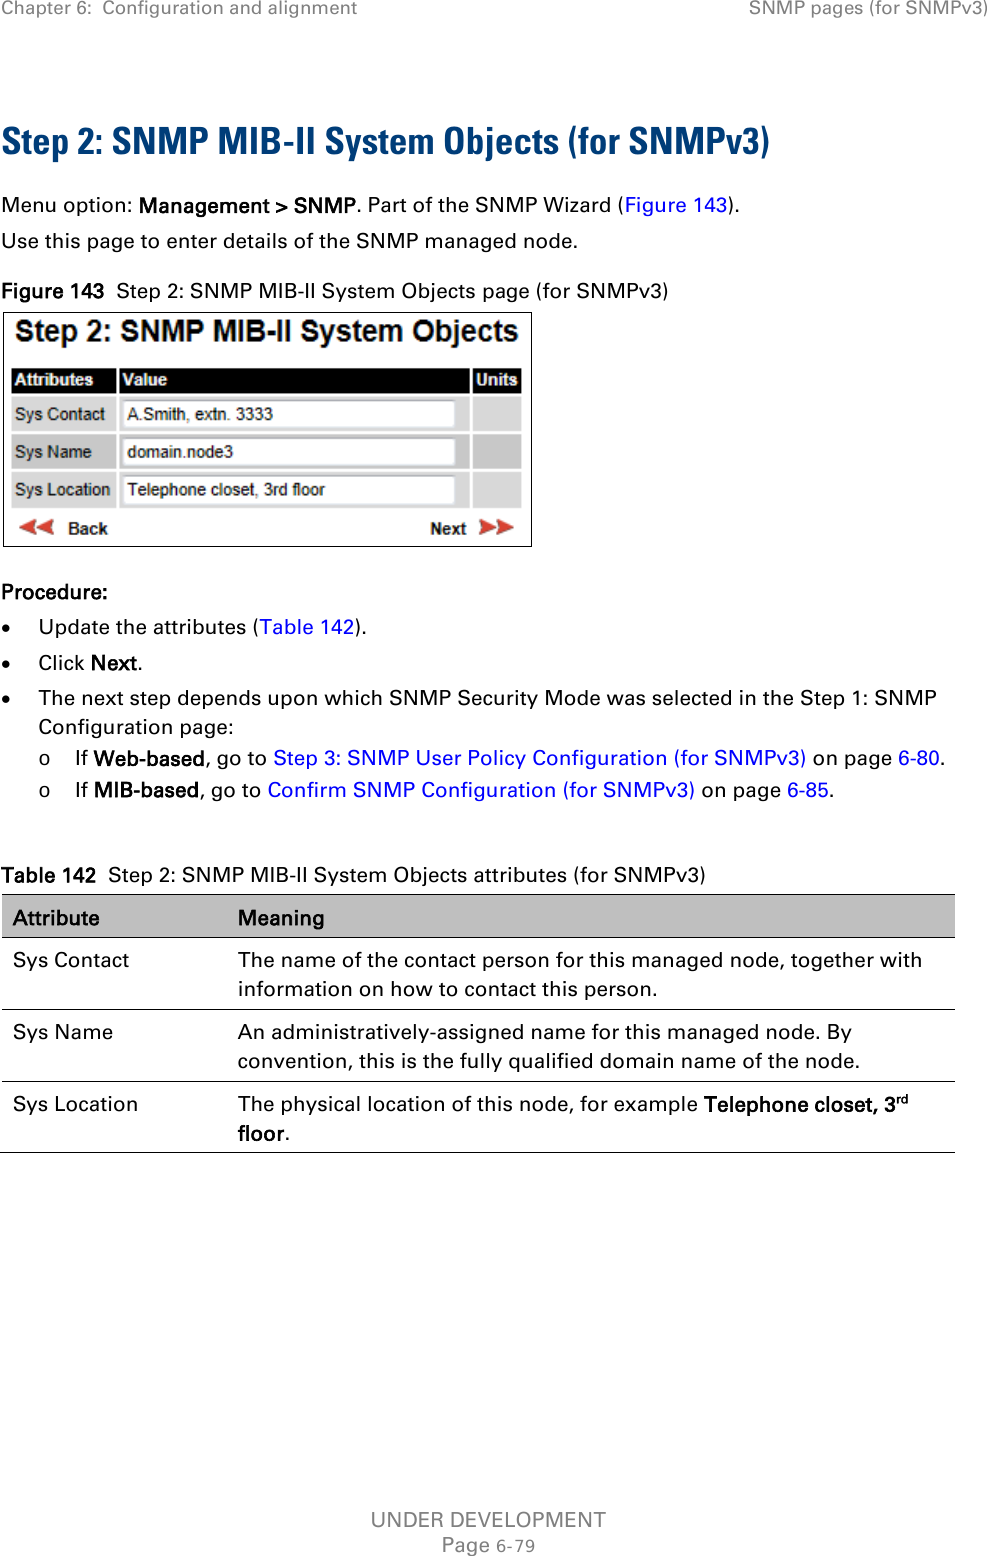 Chapter 6:  Configuration and alignment SNMP pages (for SNMPv3)  Step 2: SNMP MIB-II System Objects (for SNMPv3) Menu option: Management &gt; SNMP. Part of the SNMP Wizard (Figure 143). Use this page to enter details of the SNMP managed node. Figure 143  Step 2: SNMP MIB-II System Objects page (for SNMPv3)  Procedure: • Update the attributes (Table 142). • Click Next. • The next step depends upon which SNMP Security Mode was selected in the Step 1: SNMP Configuration page: o If Web-based, go to Step 3: SNMP User Policy Configuration (for SNMPv3) on page 6-80. o If MIB-based, go to Confirm SNMP Configuration (for SNMPv3) on page 6-85.  Table 142  Step 2: SNMP MIB-II System Objects attributes (for SNMPv3) Attribute Meaning Sys Contact The name of the contact person for this managed node, together with information on how to contact this person. Sys Name An administratively-assigned name for this managed node. By convention, this is the fully qualified domain name of the node. Sys Location The physical location of this node, for example Telephone closet, 3rd floor.   UNDER DEVELOPMENT Page 6-79 